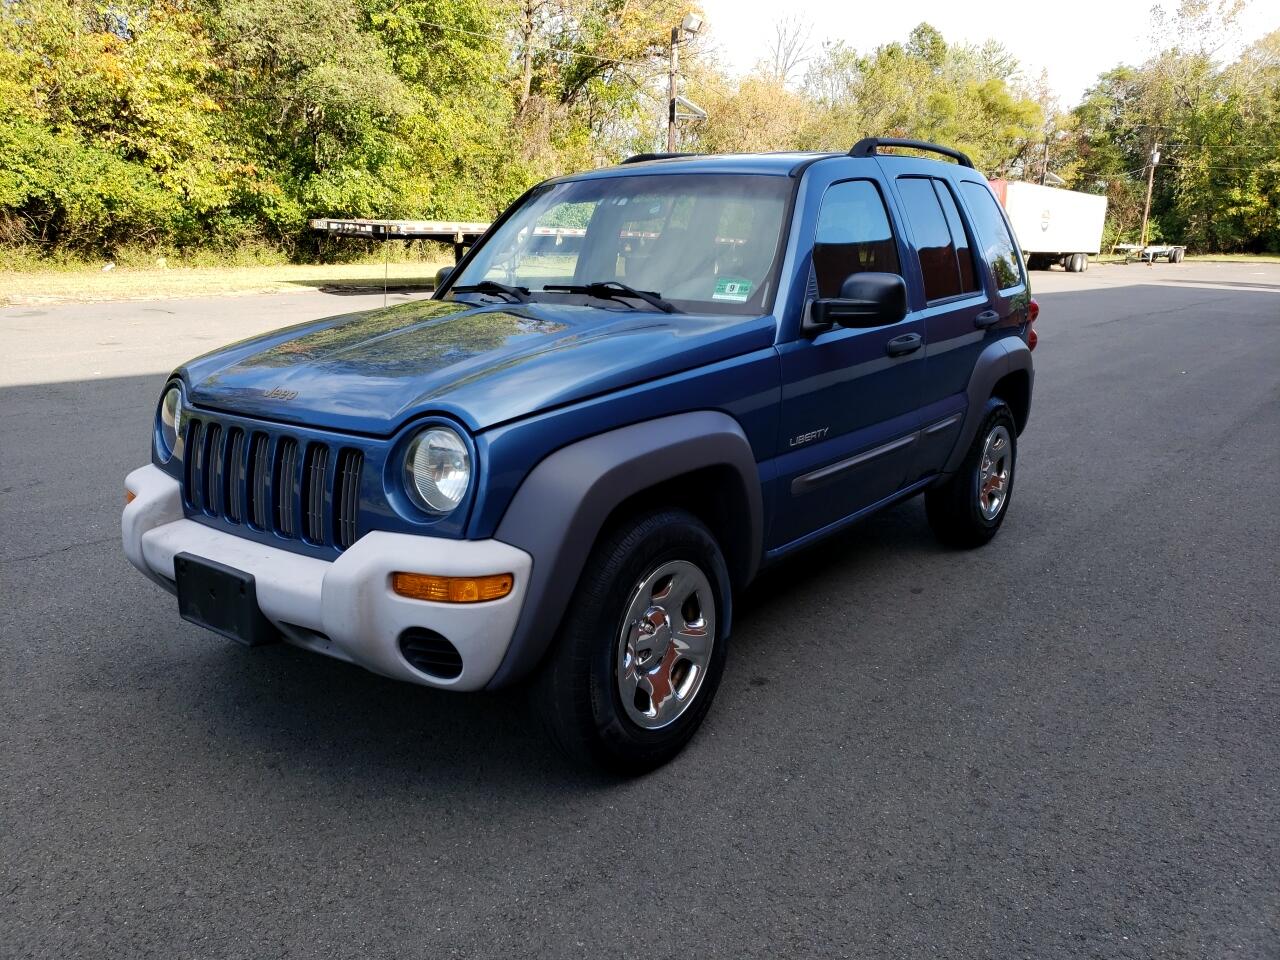 Used 2004 Jeep Liberty Sport For Sale In Trenton Nj 08638